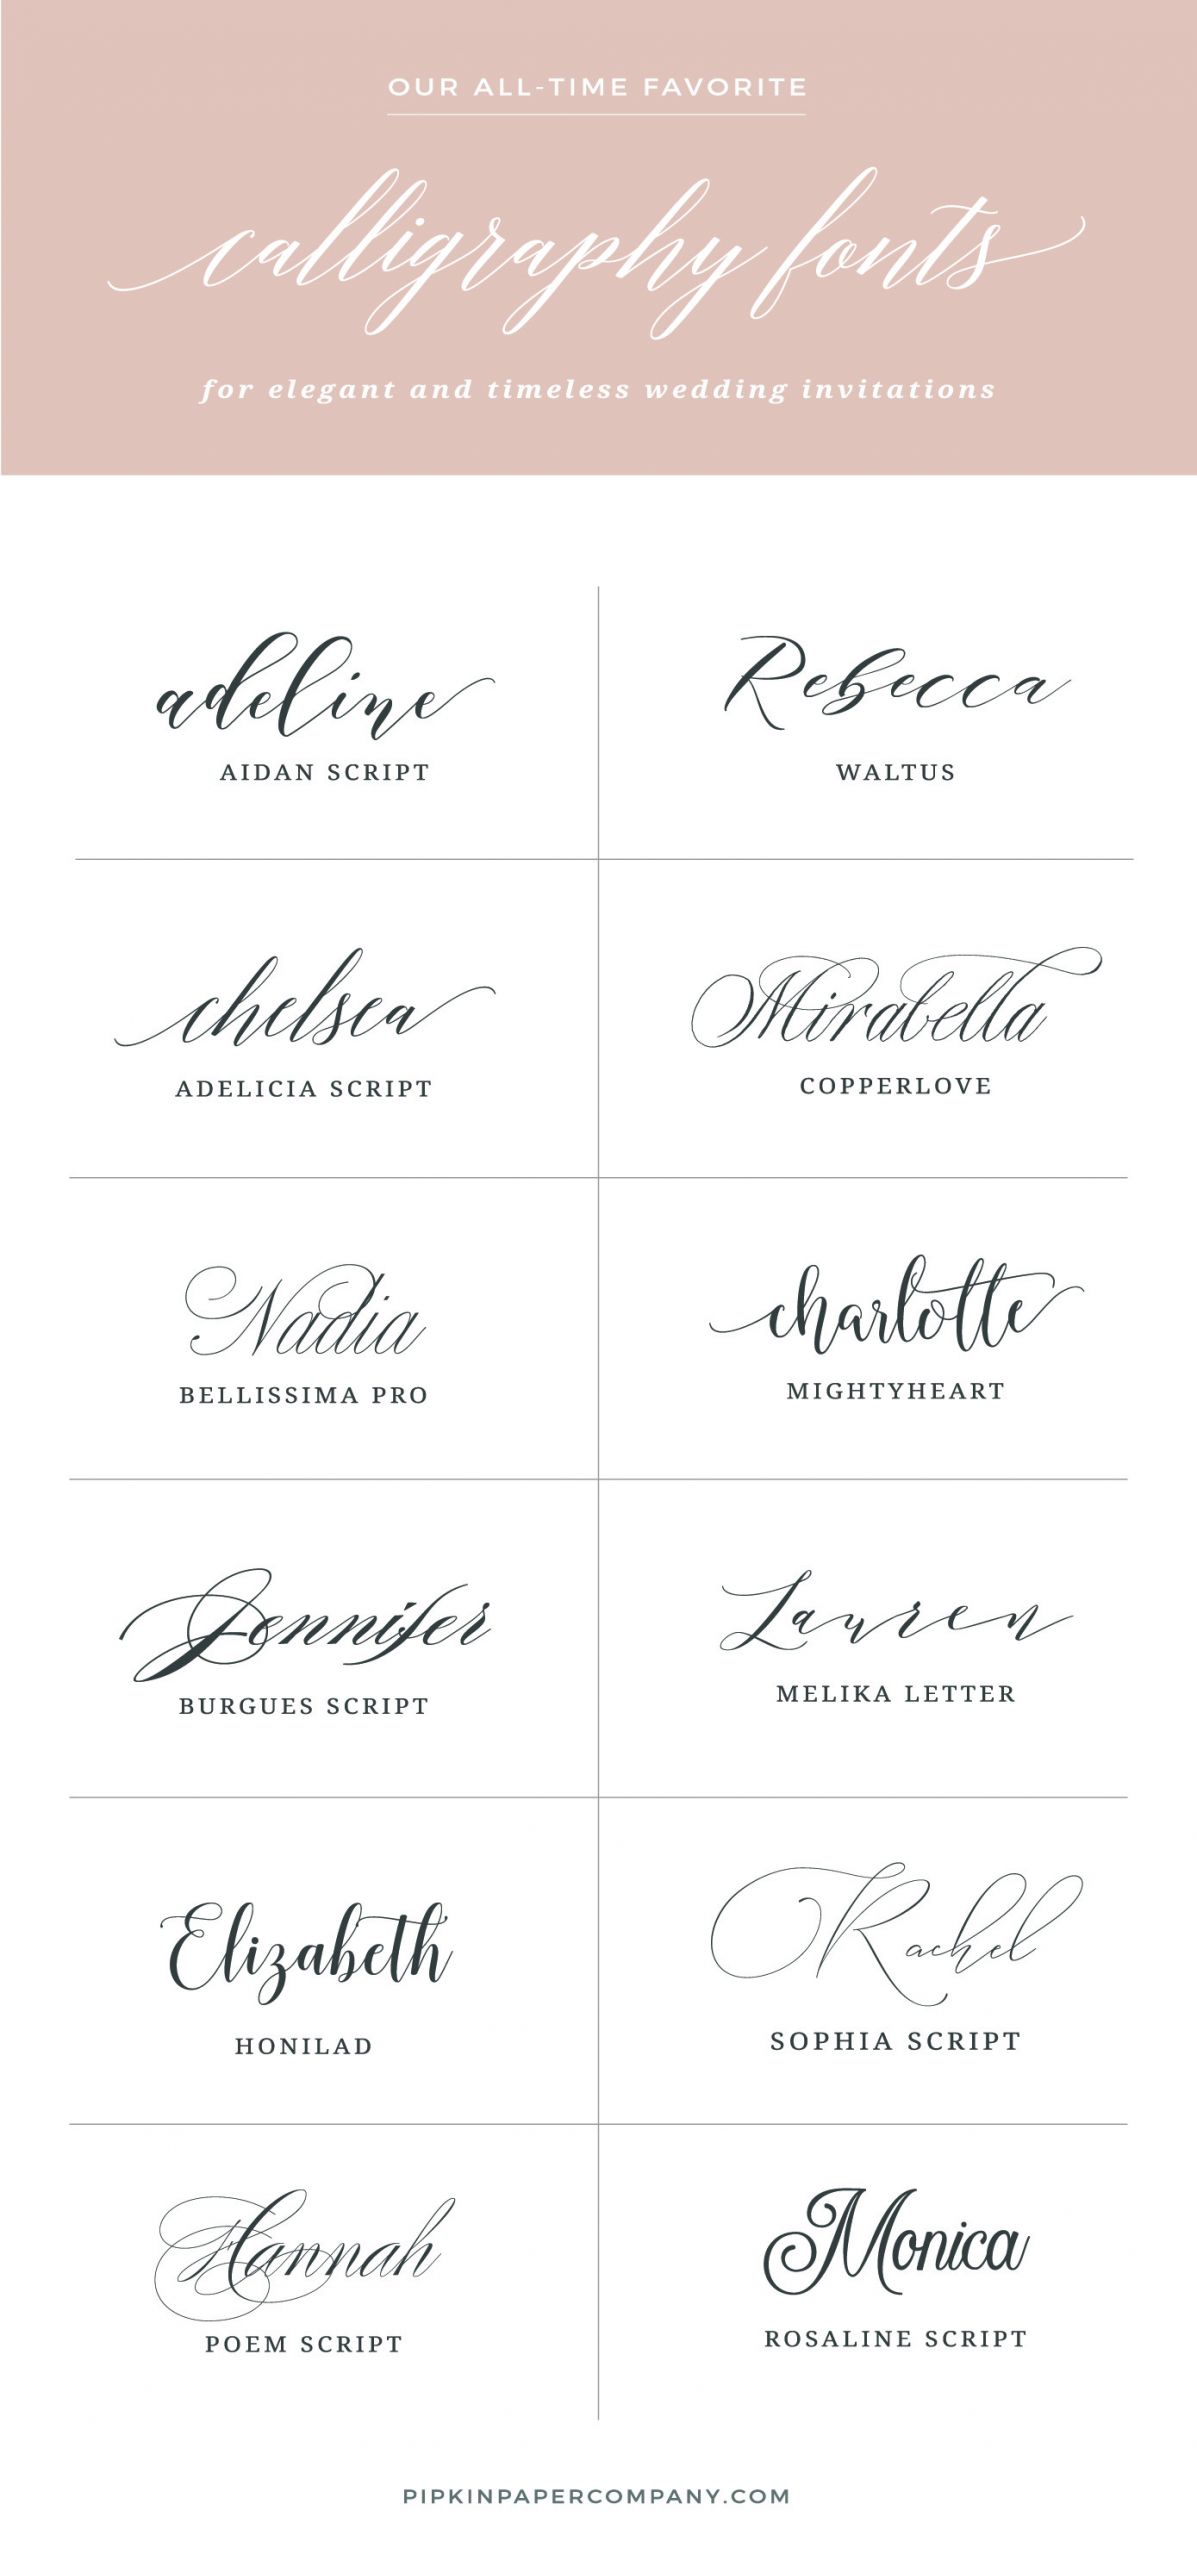 Wedding Invite Font
 THE BEST FONTS FOR WEDDING INVITATIONS